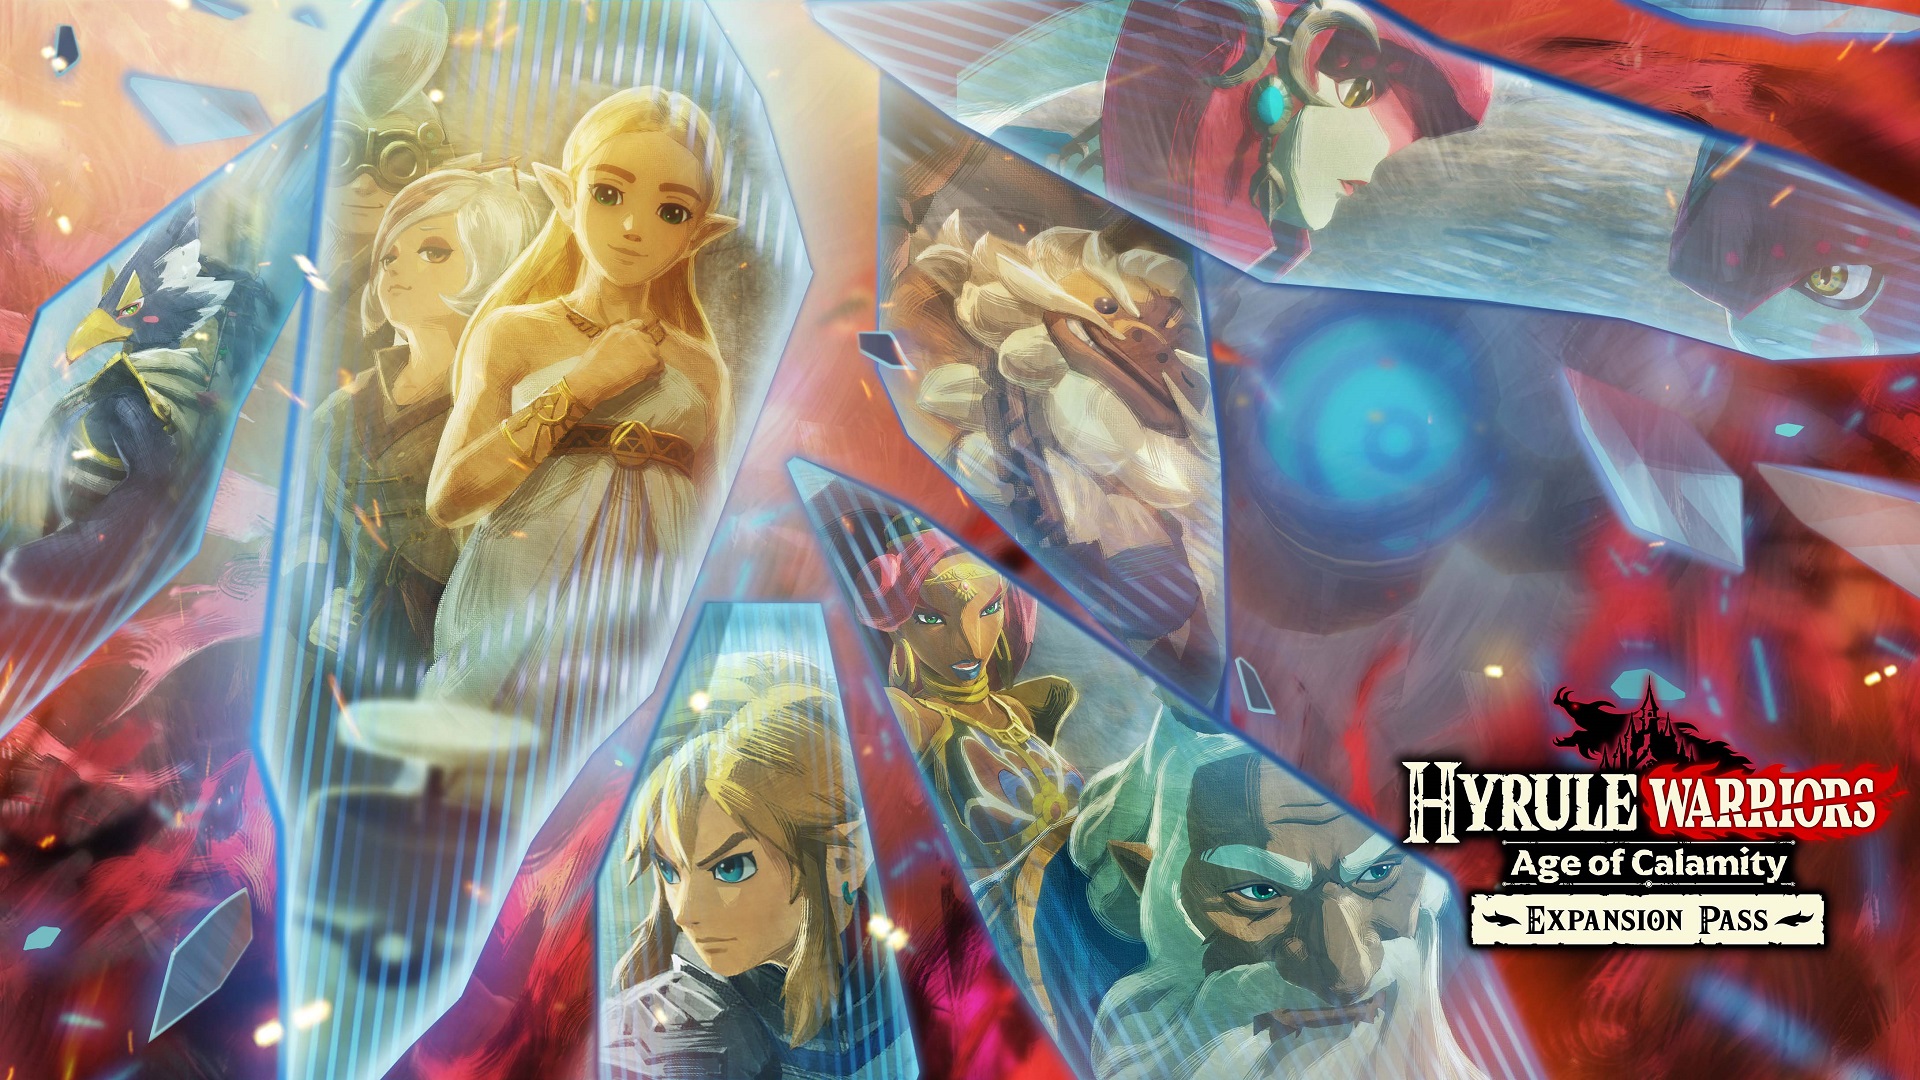 Hyrule Warriors: Age of Calamity Expansion Pass DLC Wave 2 Launches October 29